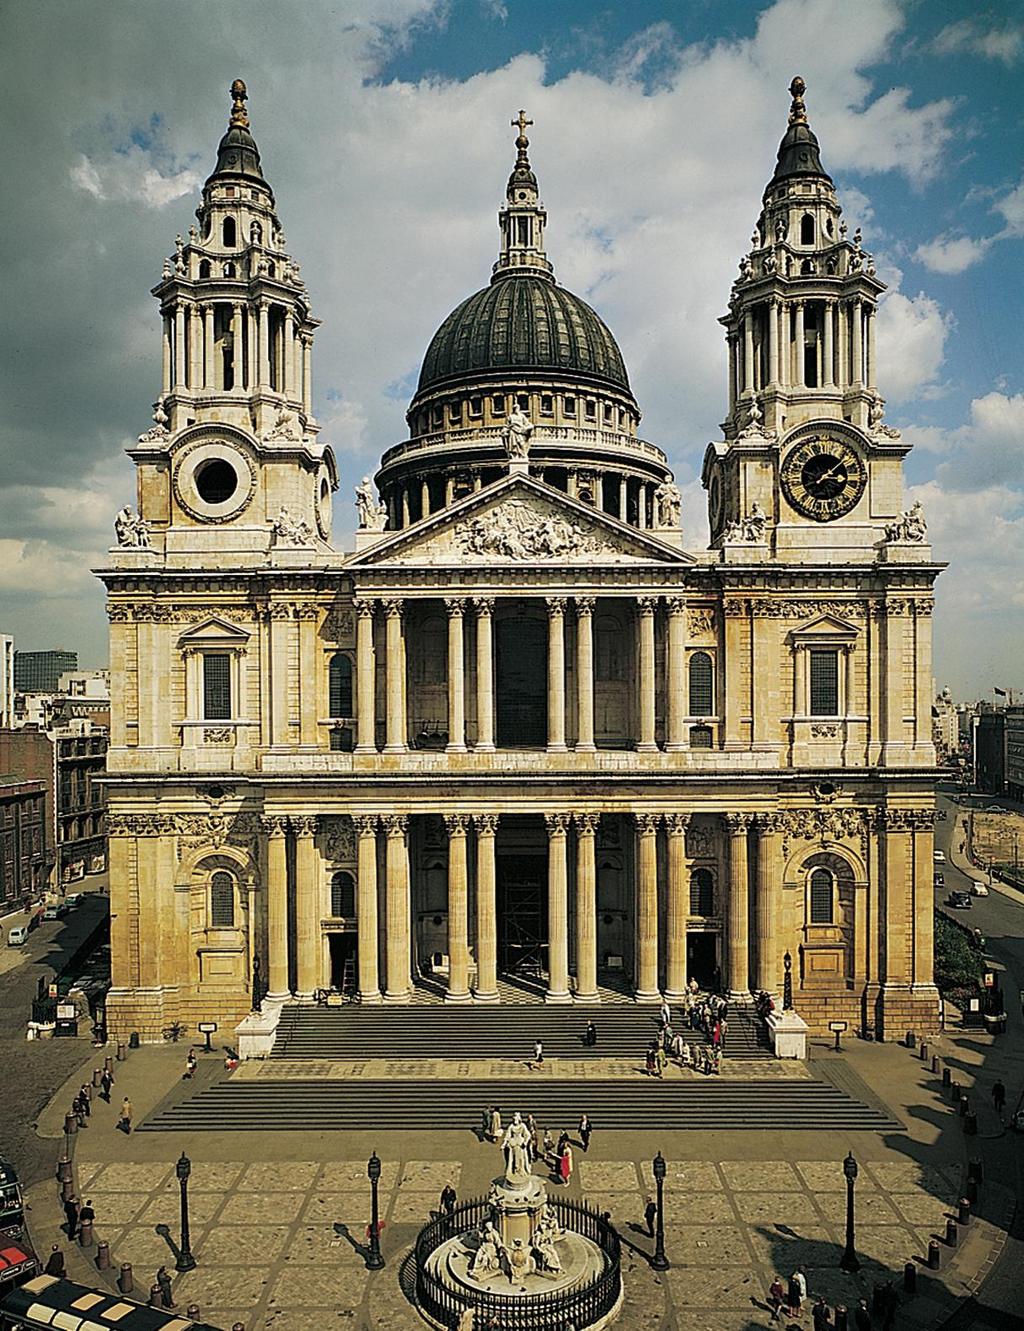 Original destroyed in the Great Fire of London in 1666 and rebuilt in the Baroque style.